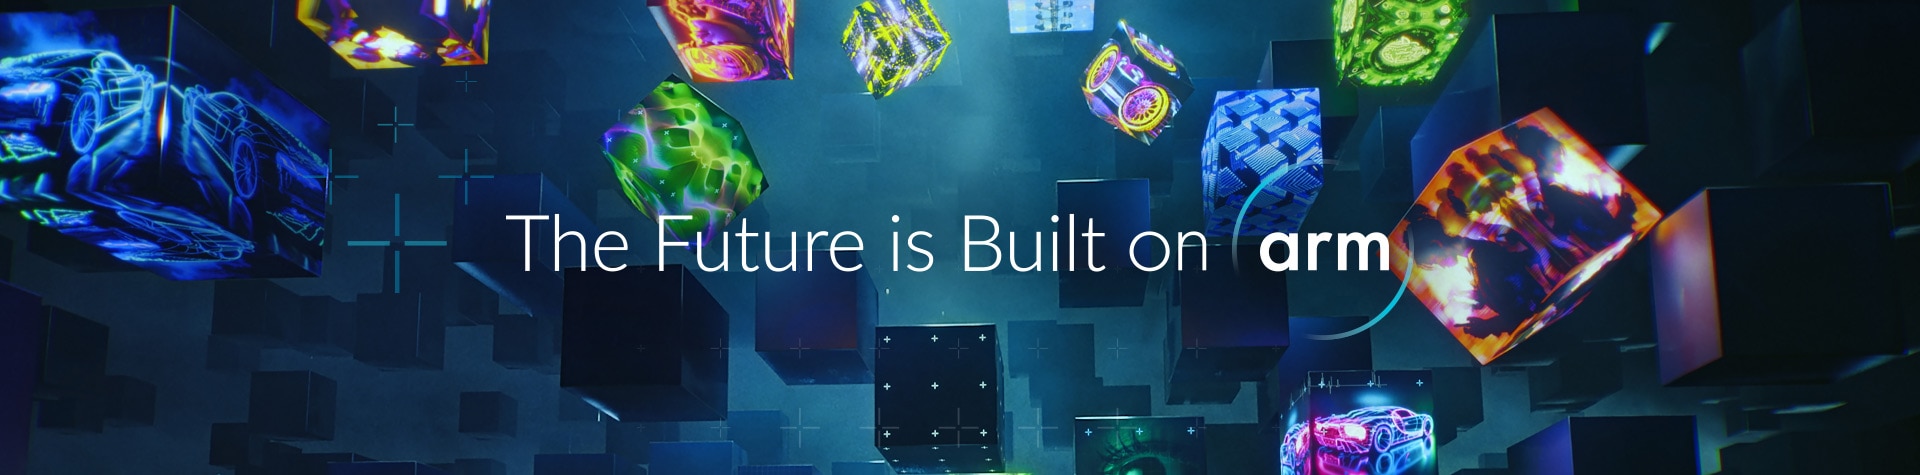 The Future is Built on Arm